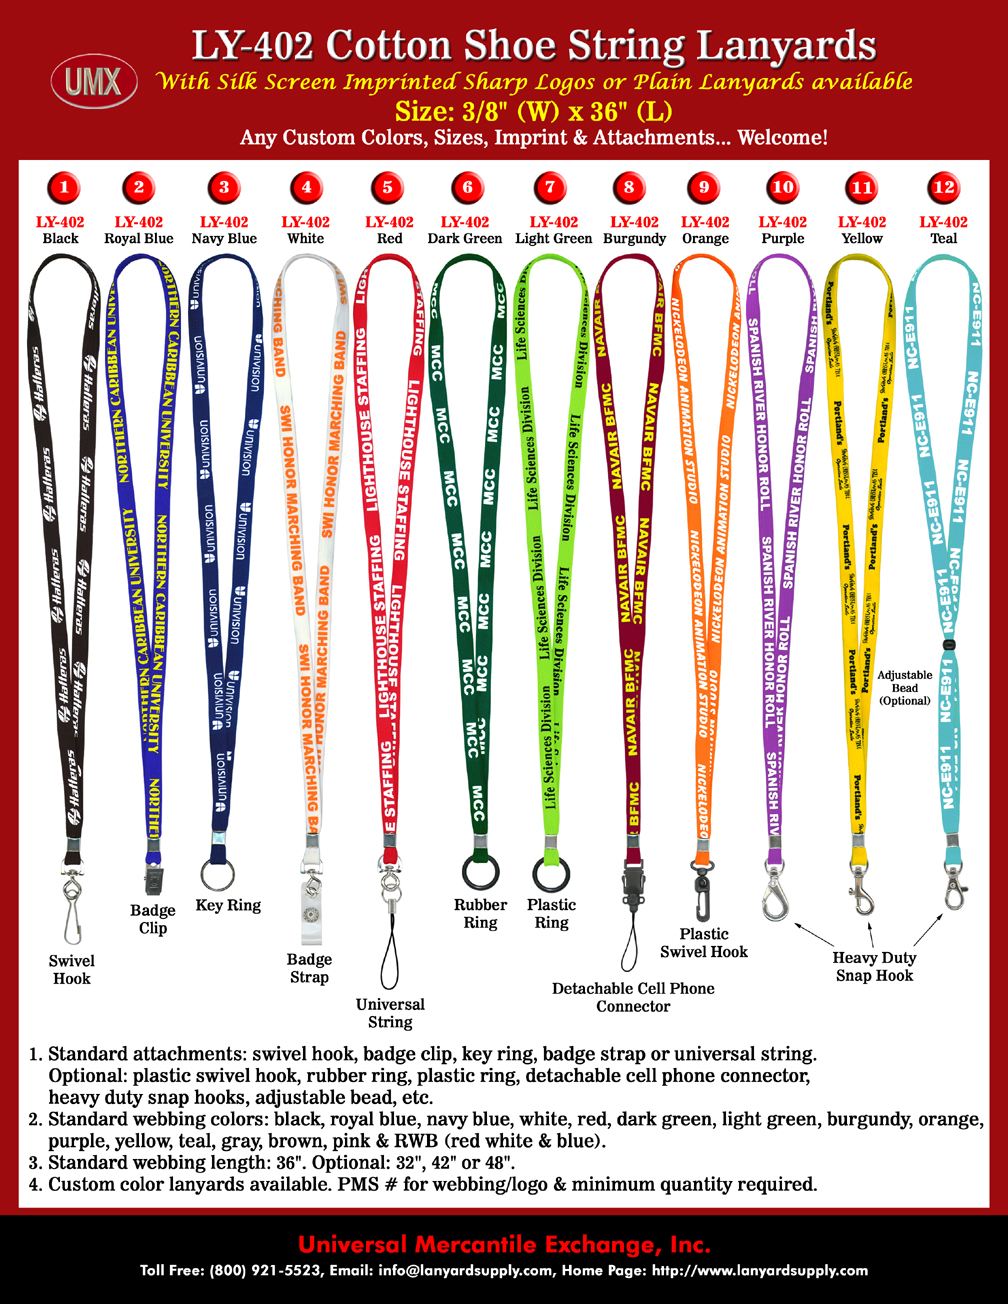 These low cost cotton custom lanyards, come with very comfortable to wear 3/8" high quality shoe string webbing.